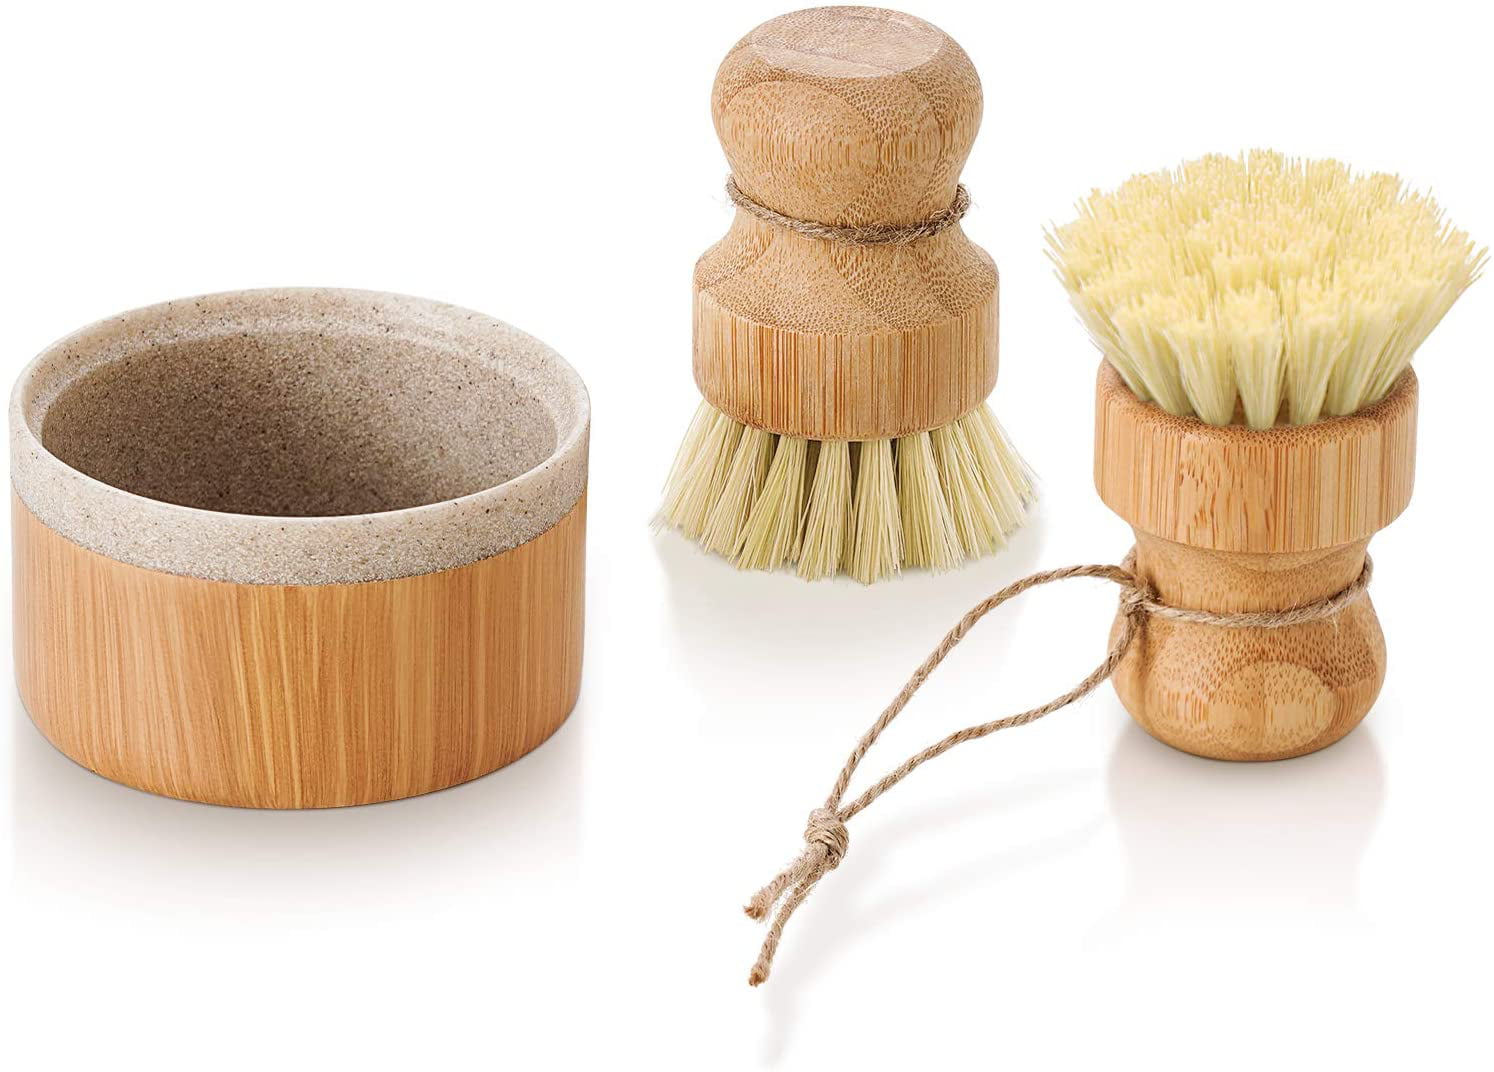 SUBEKYU Bamboo Bubble Up Dish Brush with Soap Holder, Wooden Dish Scrubber  with Soap Dispenser, Natural Kitchen Scrub Brush,Washing Pot/Pans/Cast